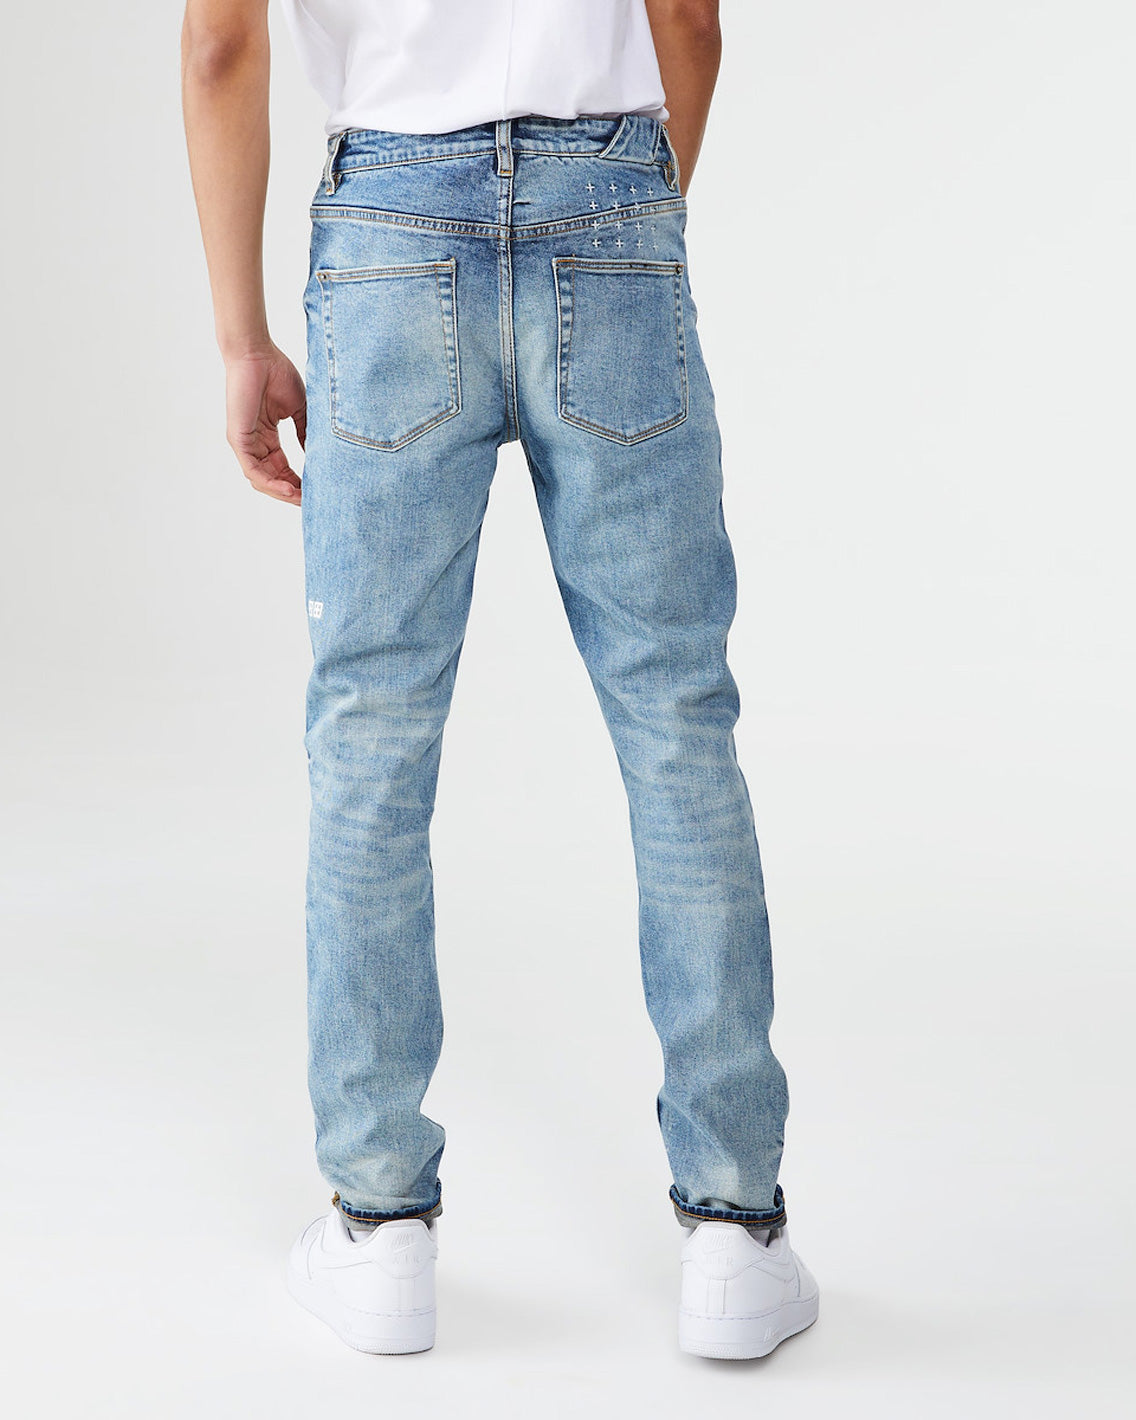 One of our favourite denim styles from Ksubi. The Ksubi Chitch denim in Pure Dynamite is constructed with a mid-rise and made from heavy-duty premium stretch cotton. These jeans are coloured with a deep blue and signed off with a vintage wash for an aged look. Finished with signature Ksubi branding and hardwear.